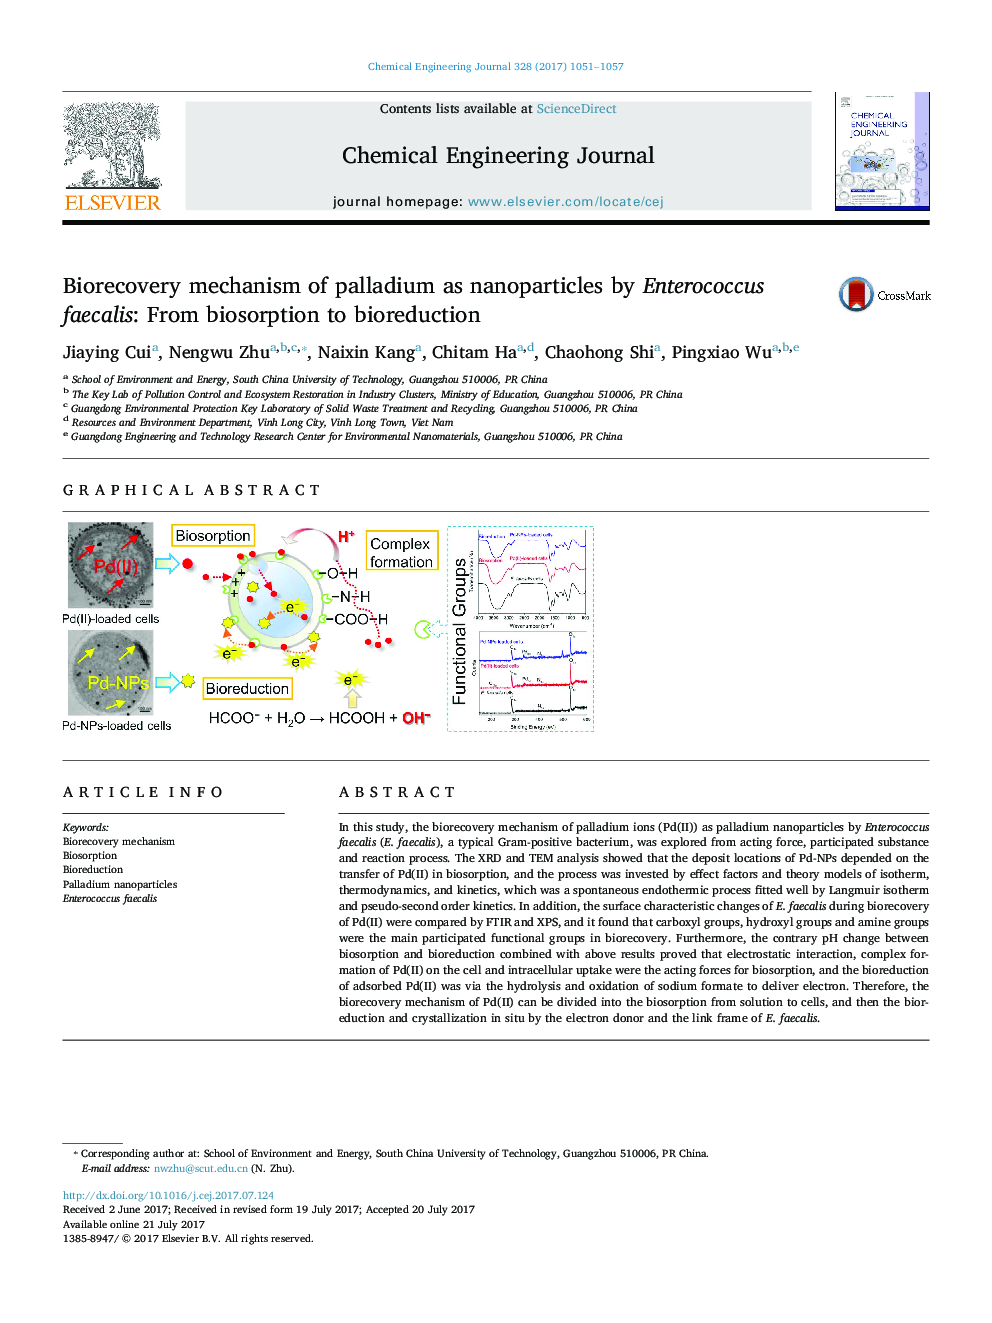 Biorecovery mechanism of palladium as nanoparticles by Enterococcus faecalis: From biosorption to bioreduction